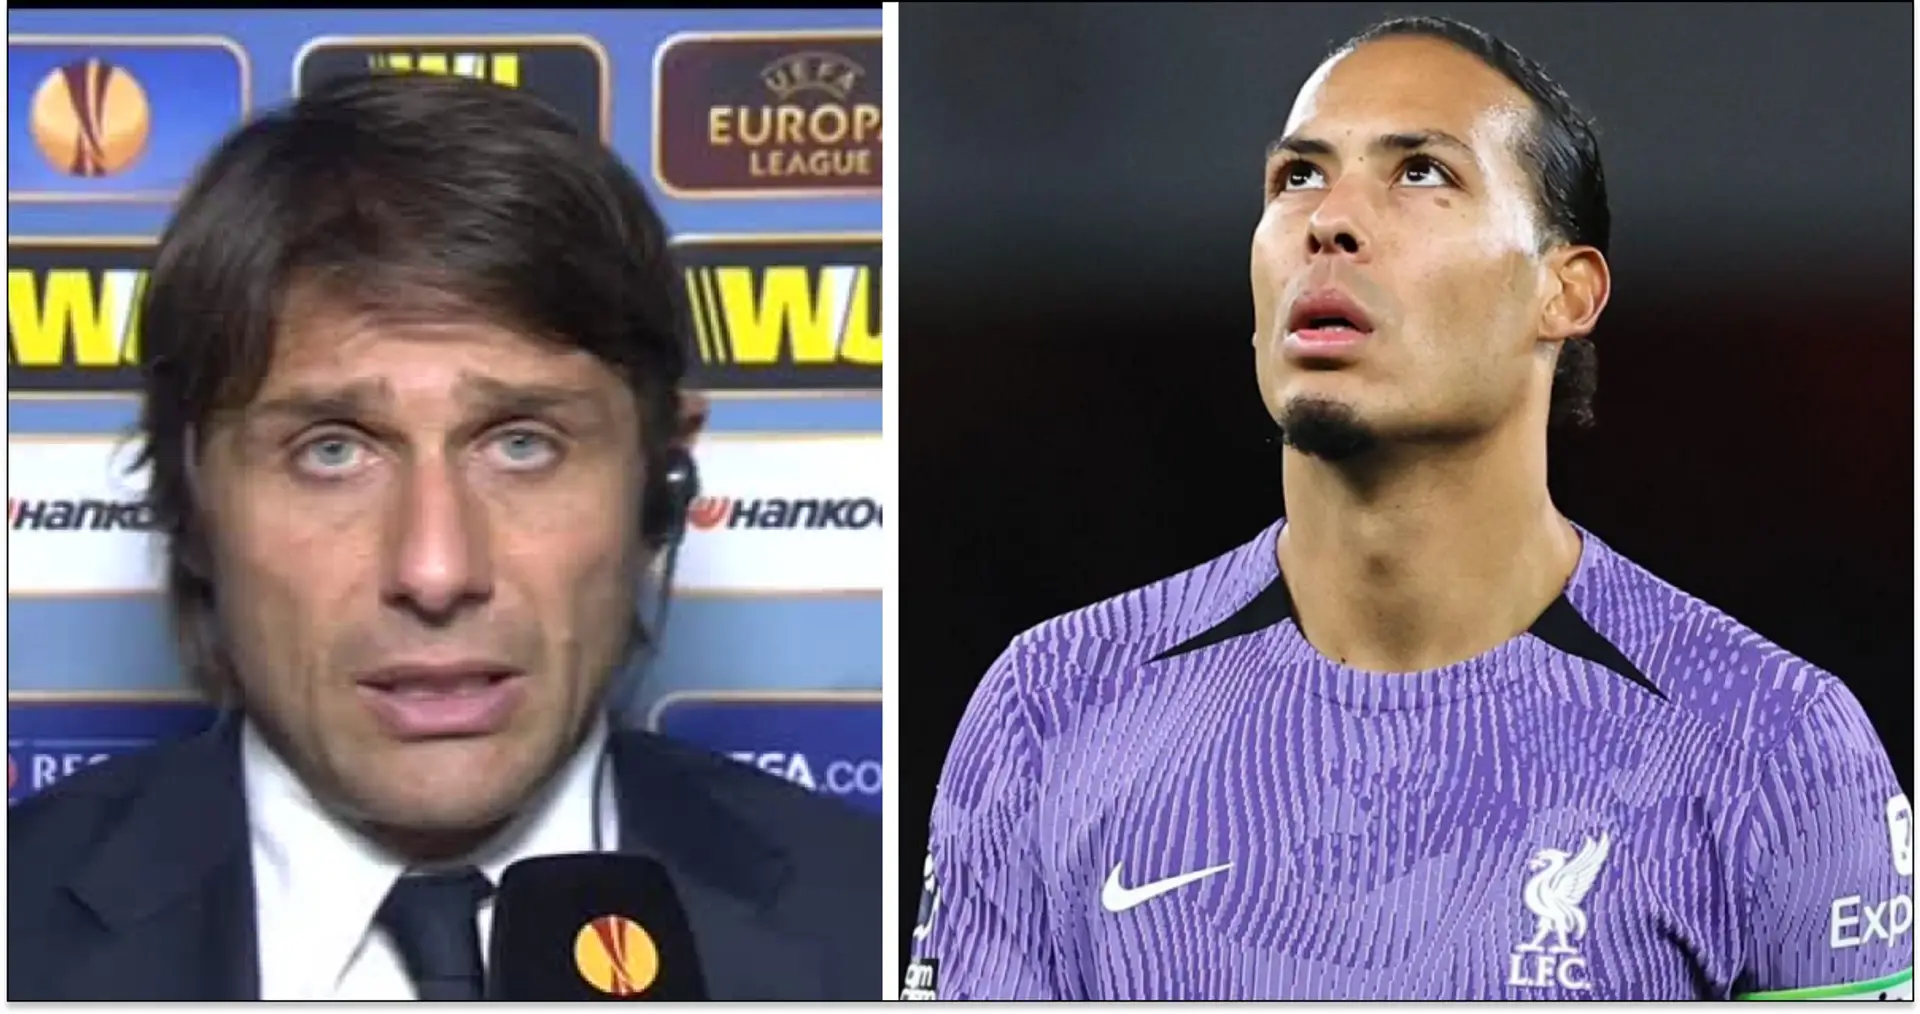 Conte says he wanted to sign Van Dijk for Chelsea: 'We could've become dominant'